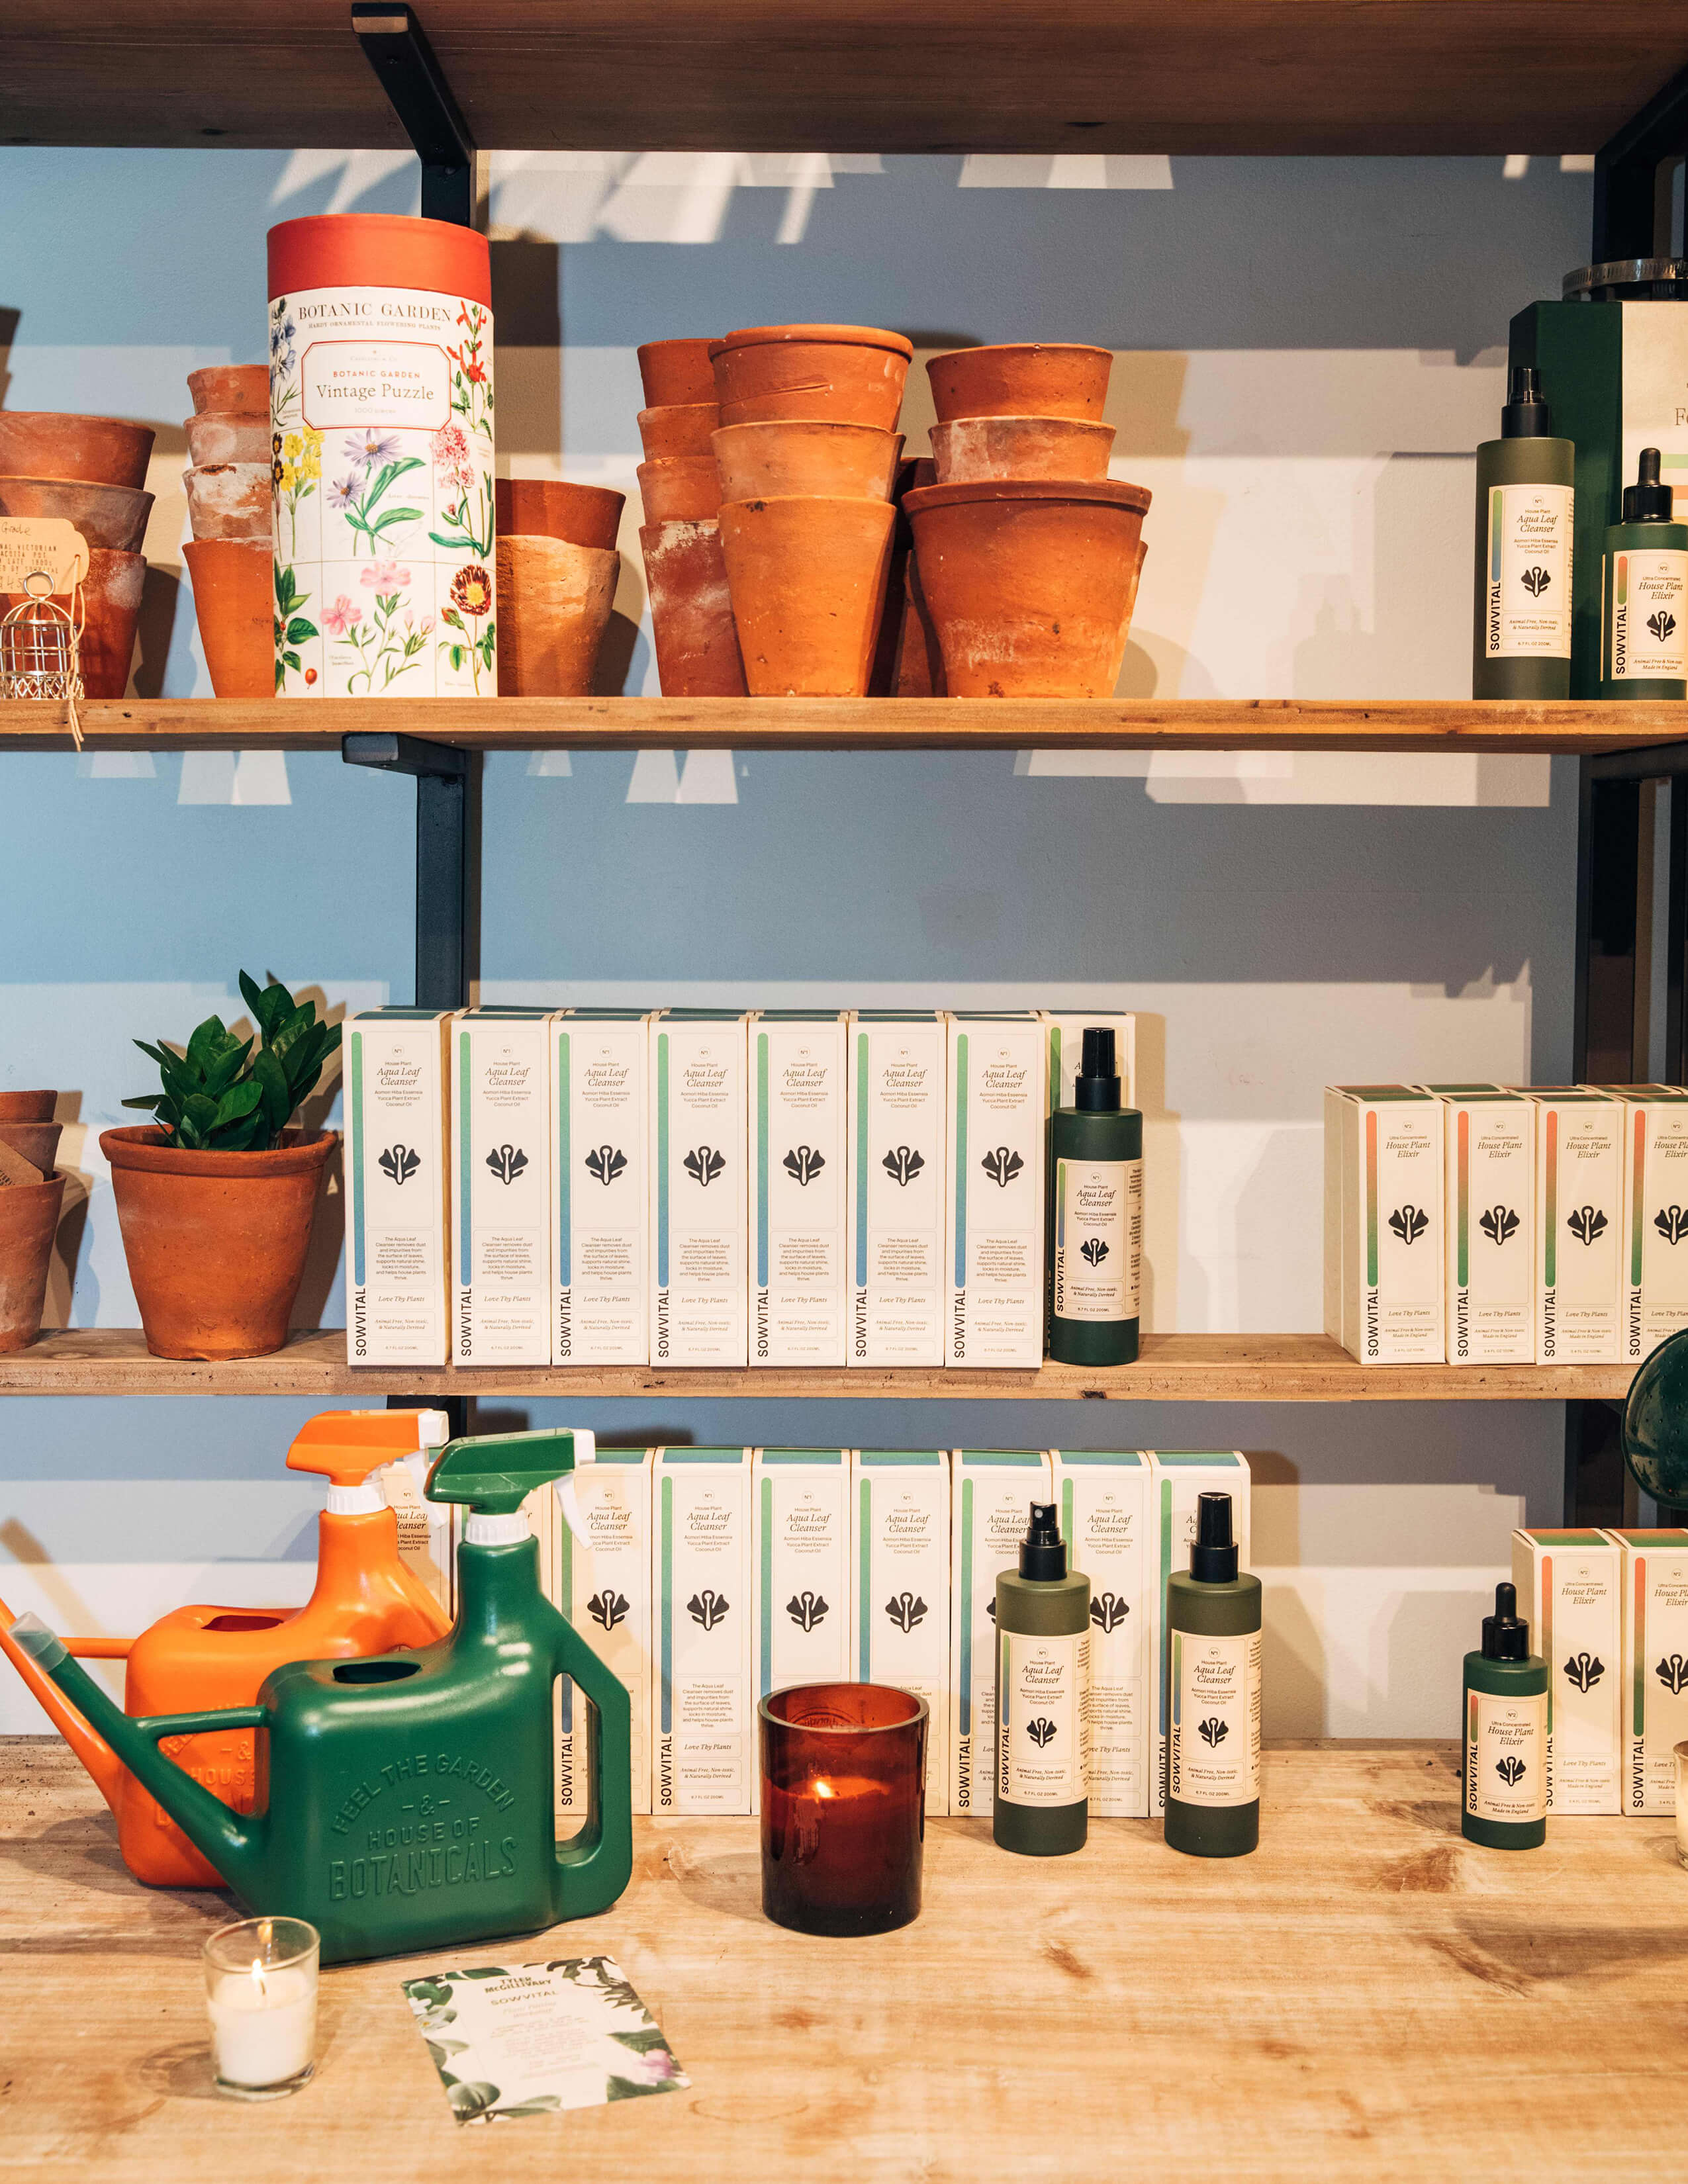 A shelf of Sowvital house plant products and terracotta pots while there are orange and green water cans, and two lightened-up candles around on the surface.